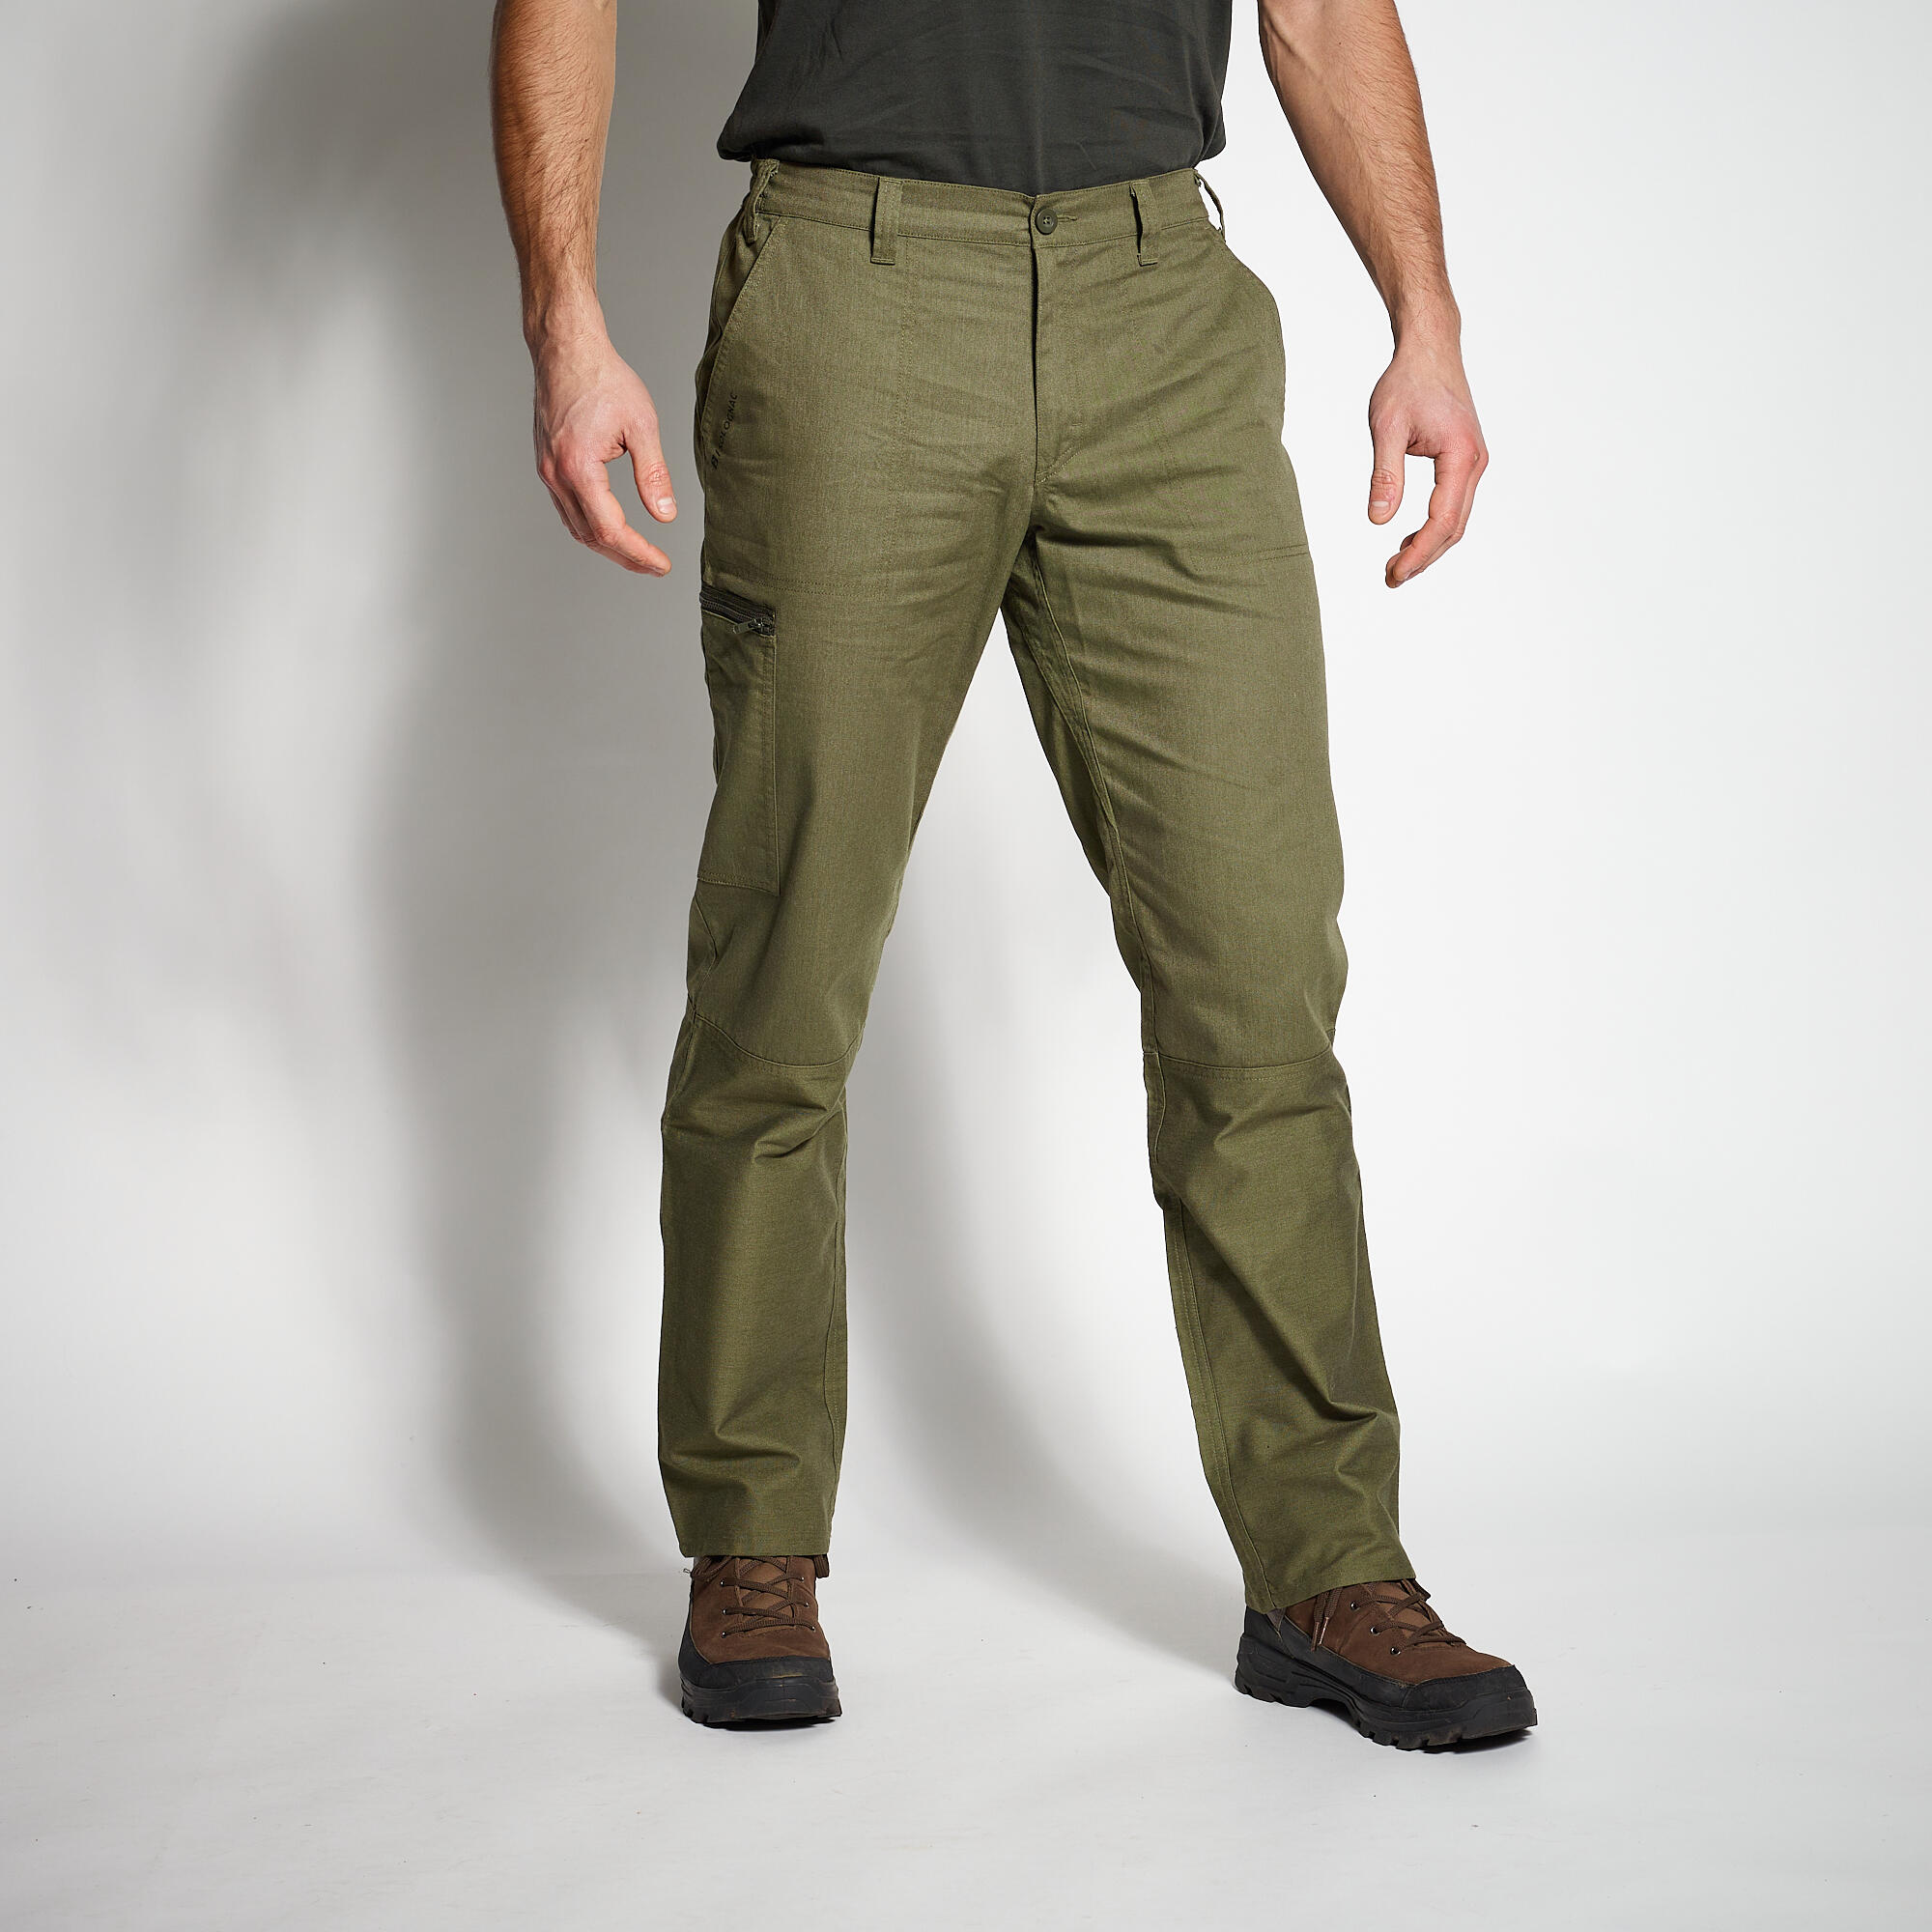 Green Pants For Men Male Casual Business Solid Slim Pants Zipper Fly Pocket  Cropped Pencil Pant Trousers - Walmart.com